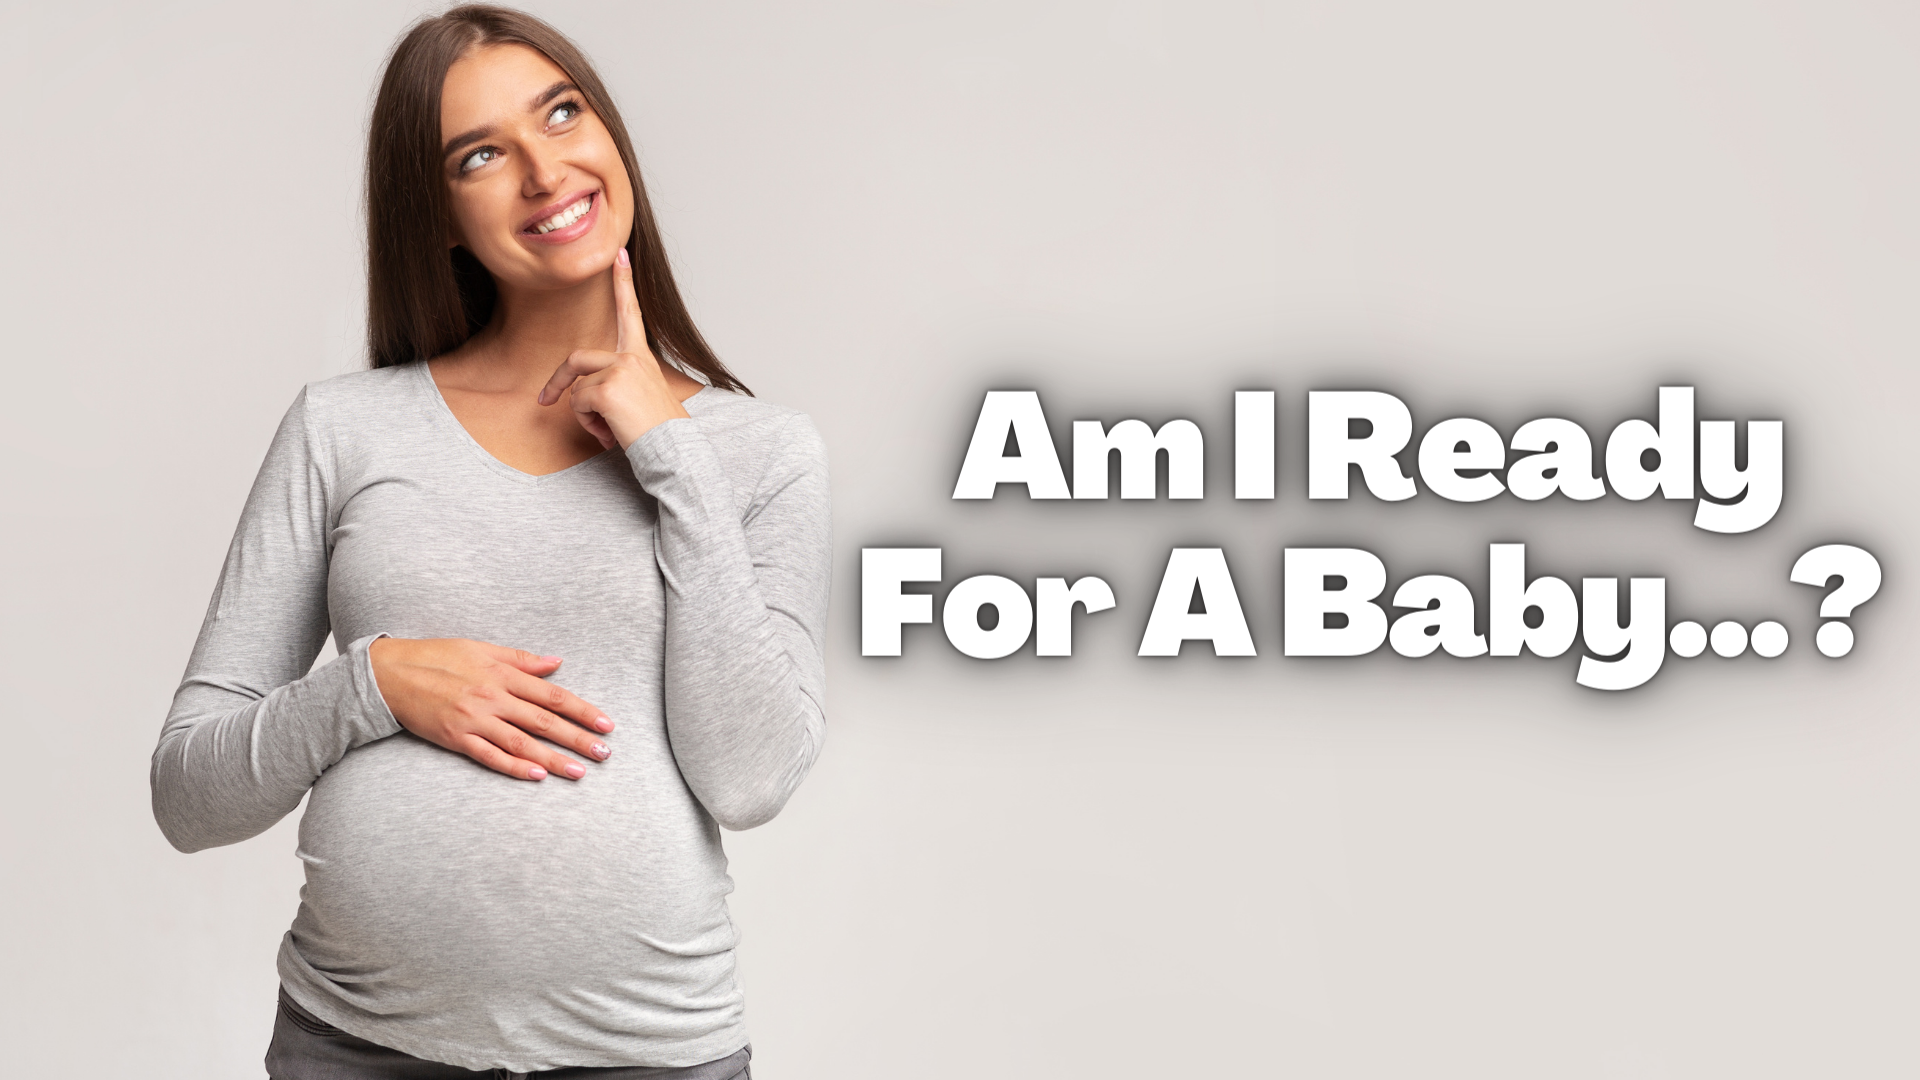 Am I Ready For A Baby...?